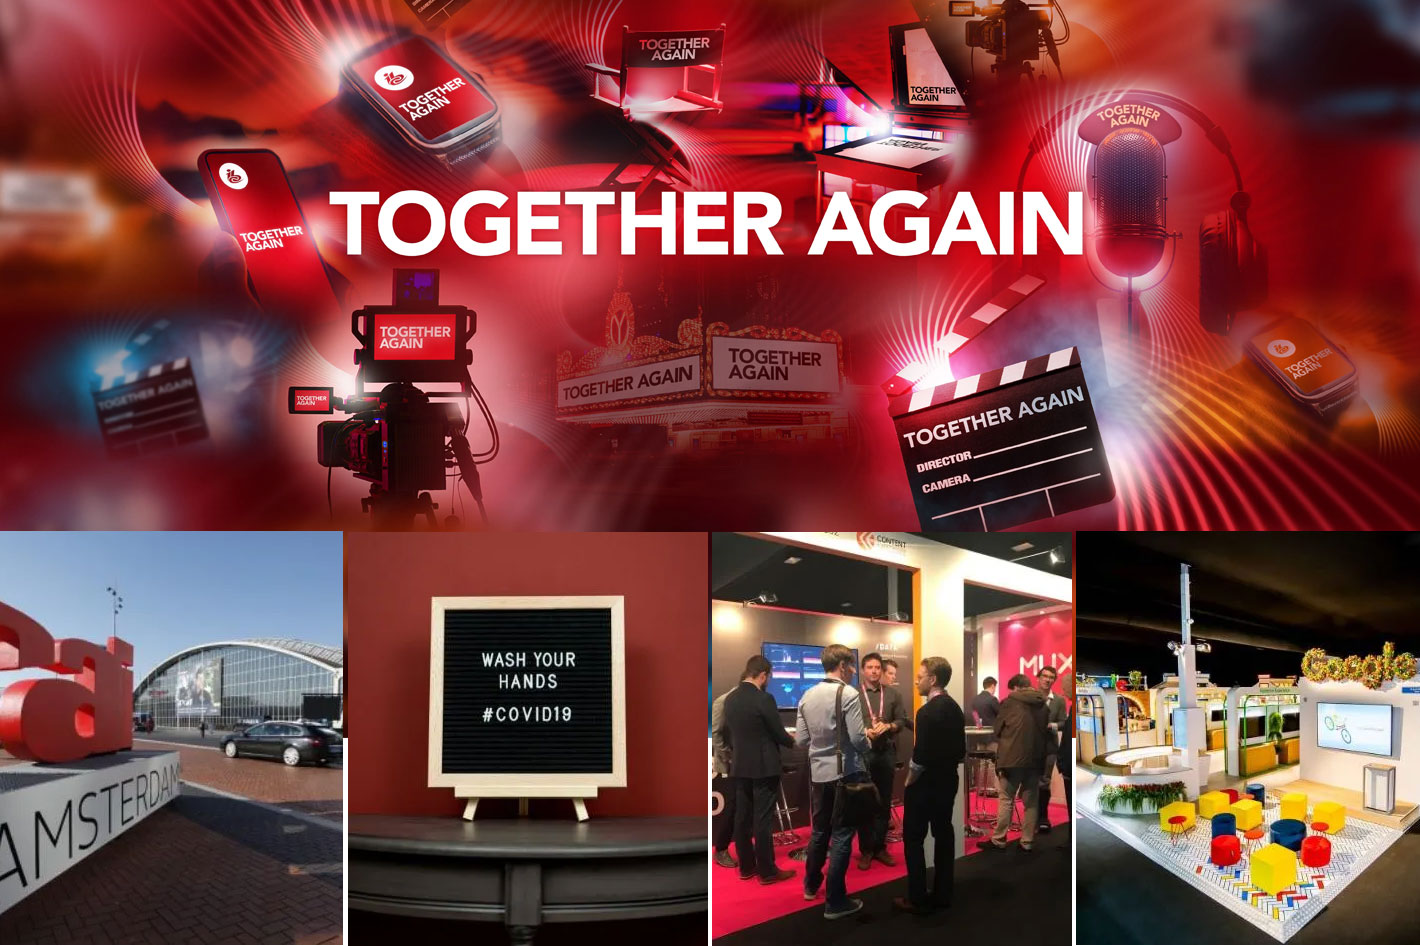 IBC2021 will be an in-person event: get together again next December